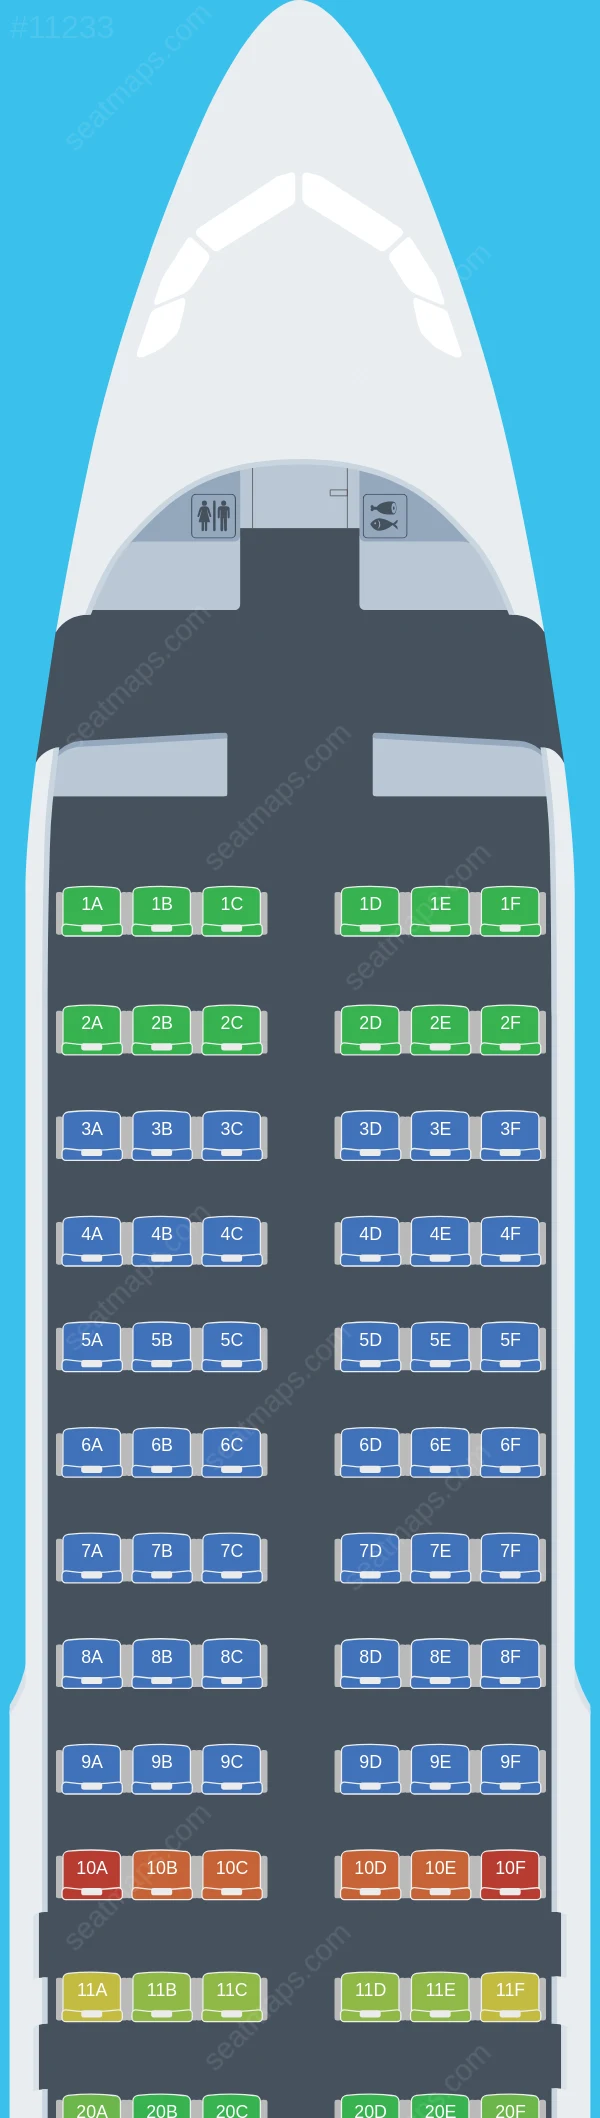 PLAY Airbus A320neo V.1 seatmap preview